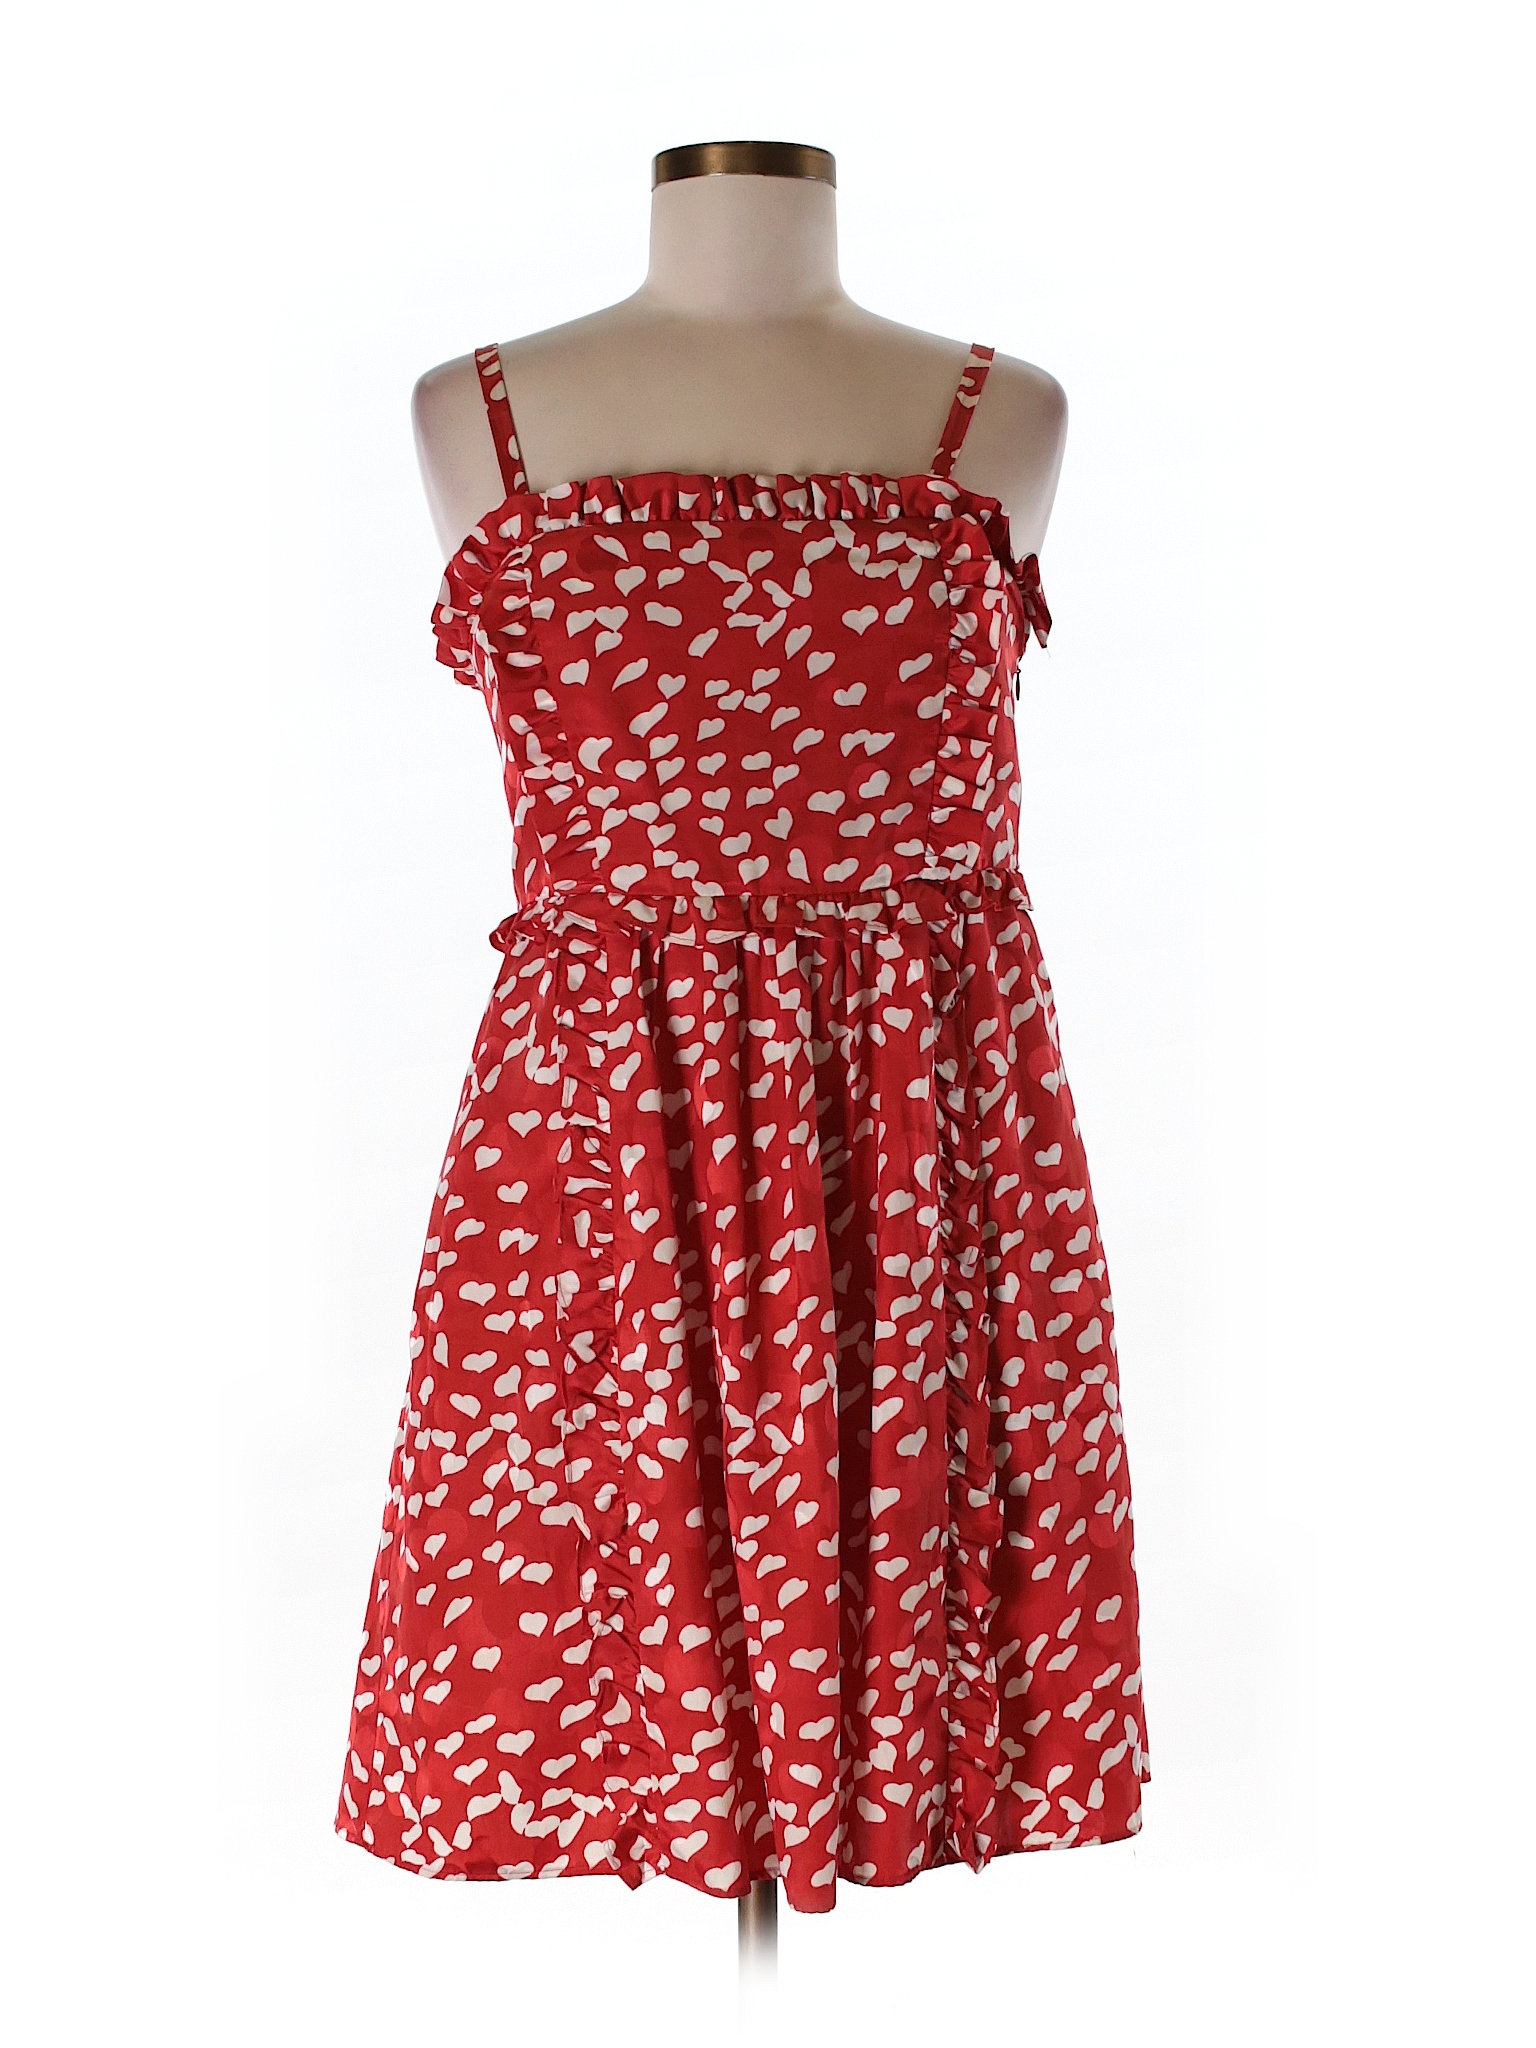 Marc by Marc Jacobs Print Red Silk Dress Size 8 - 82% off | thredUP